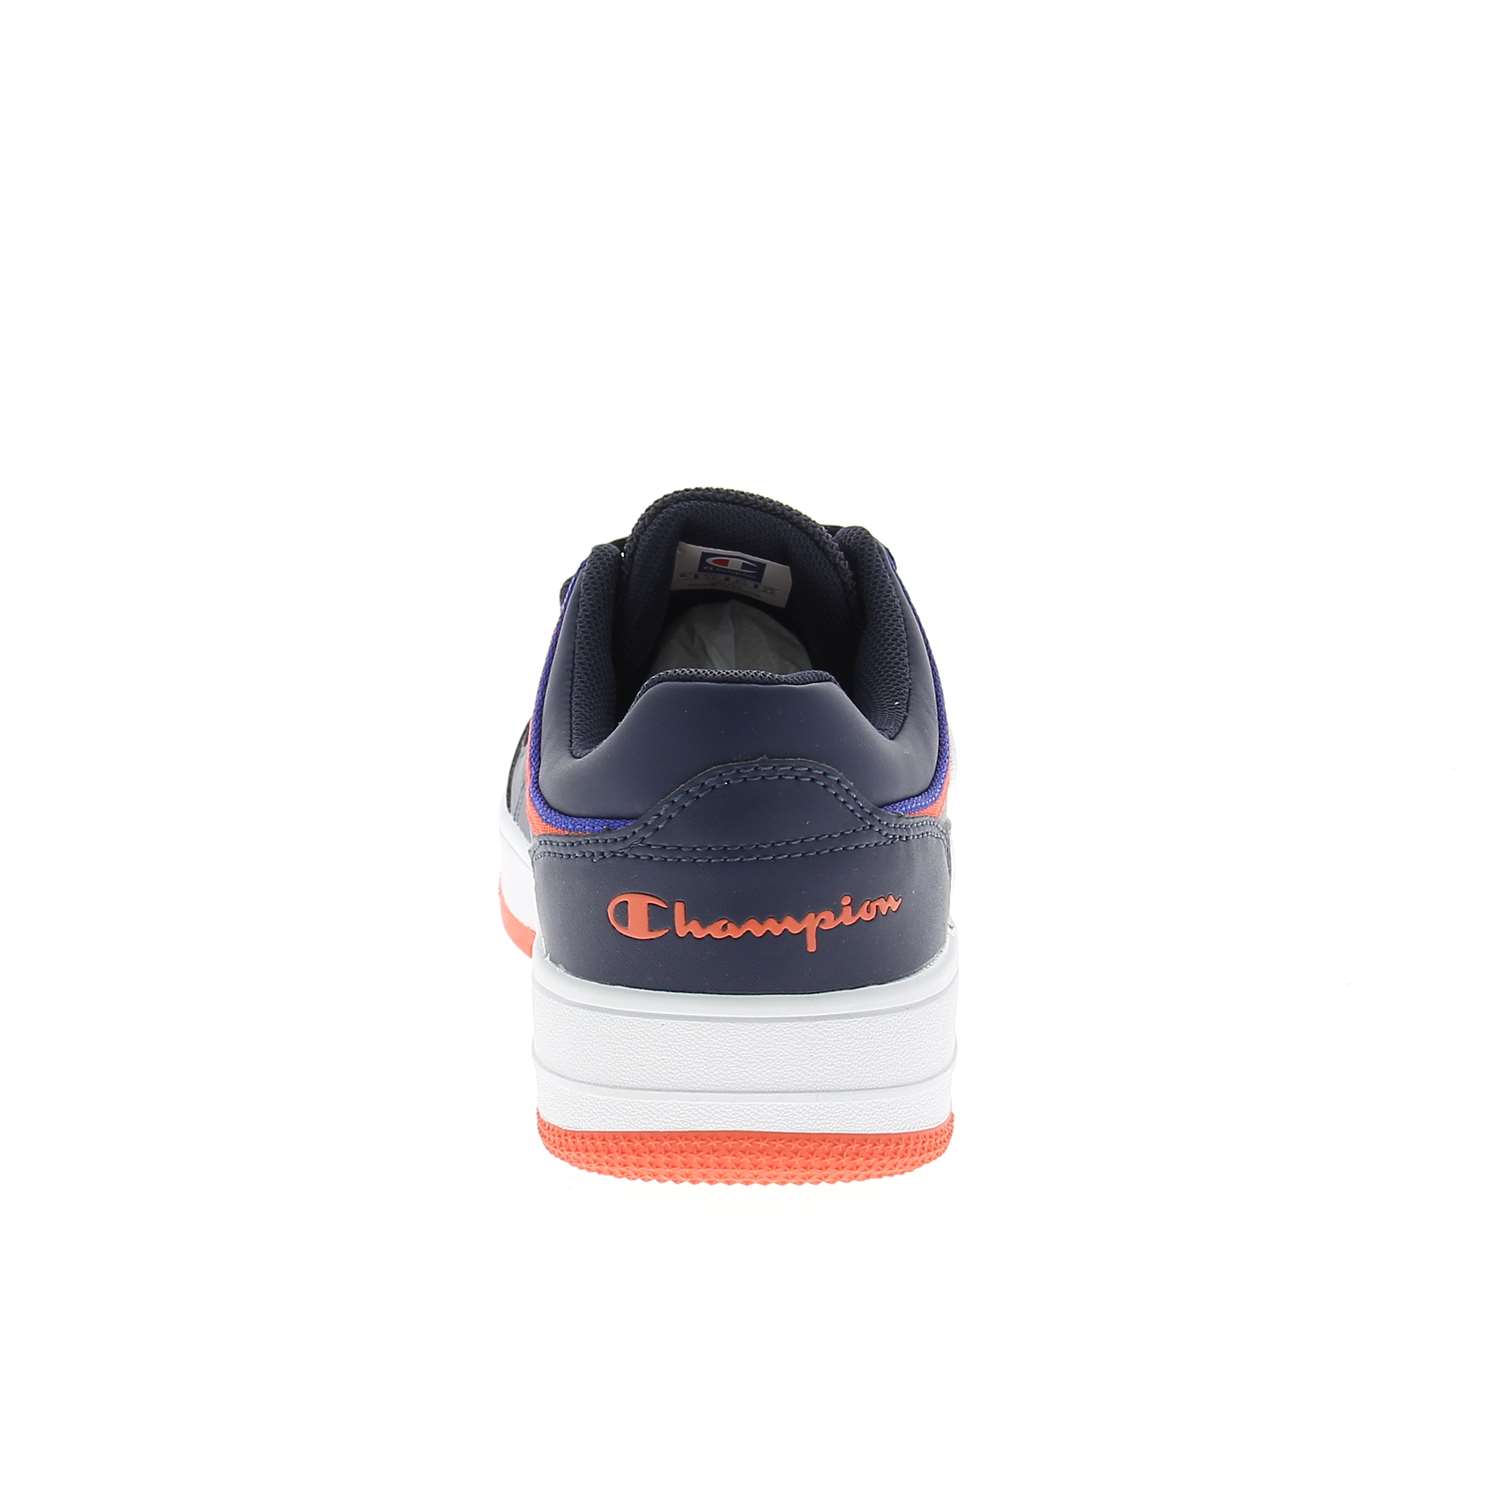 04 - REBOUND LOW - CHAMPION - Baskets - Synthétique